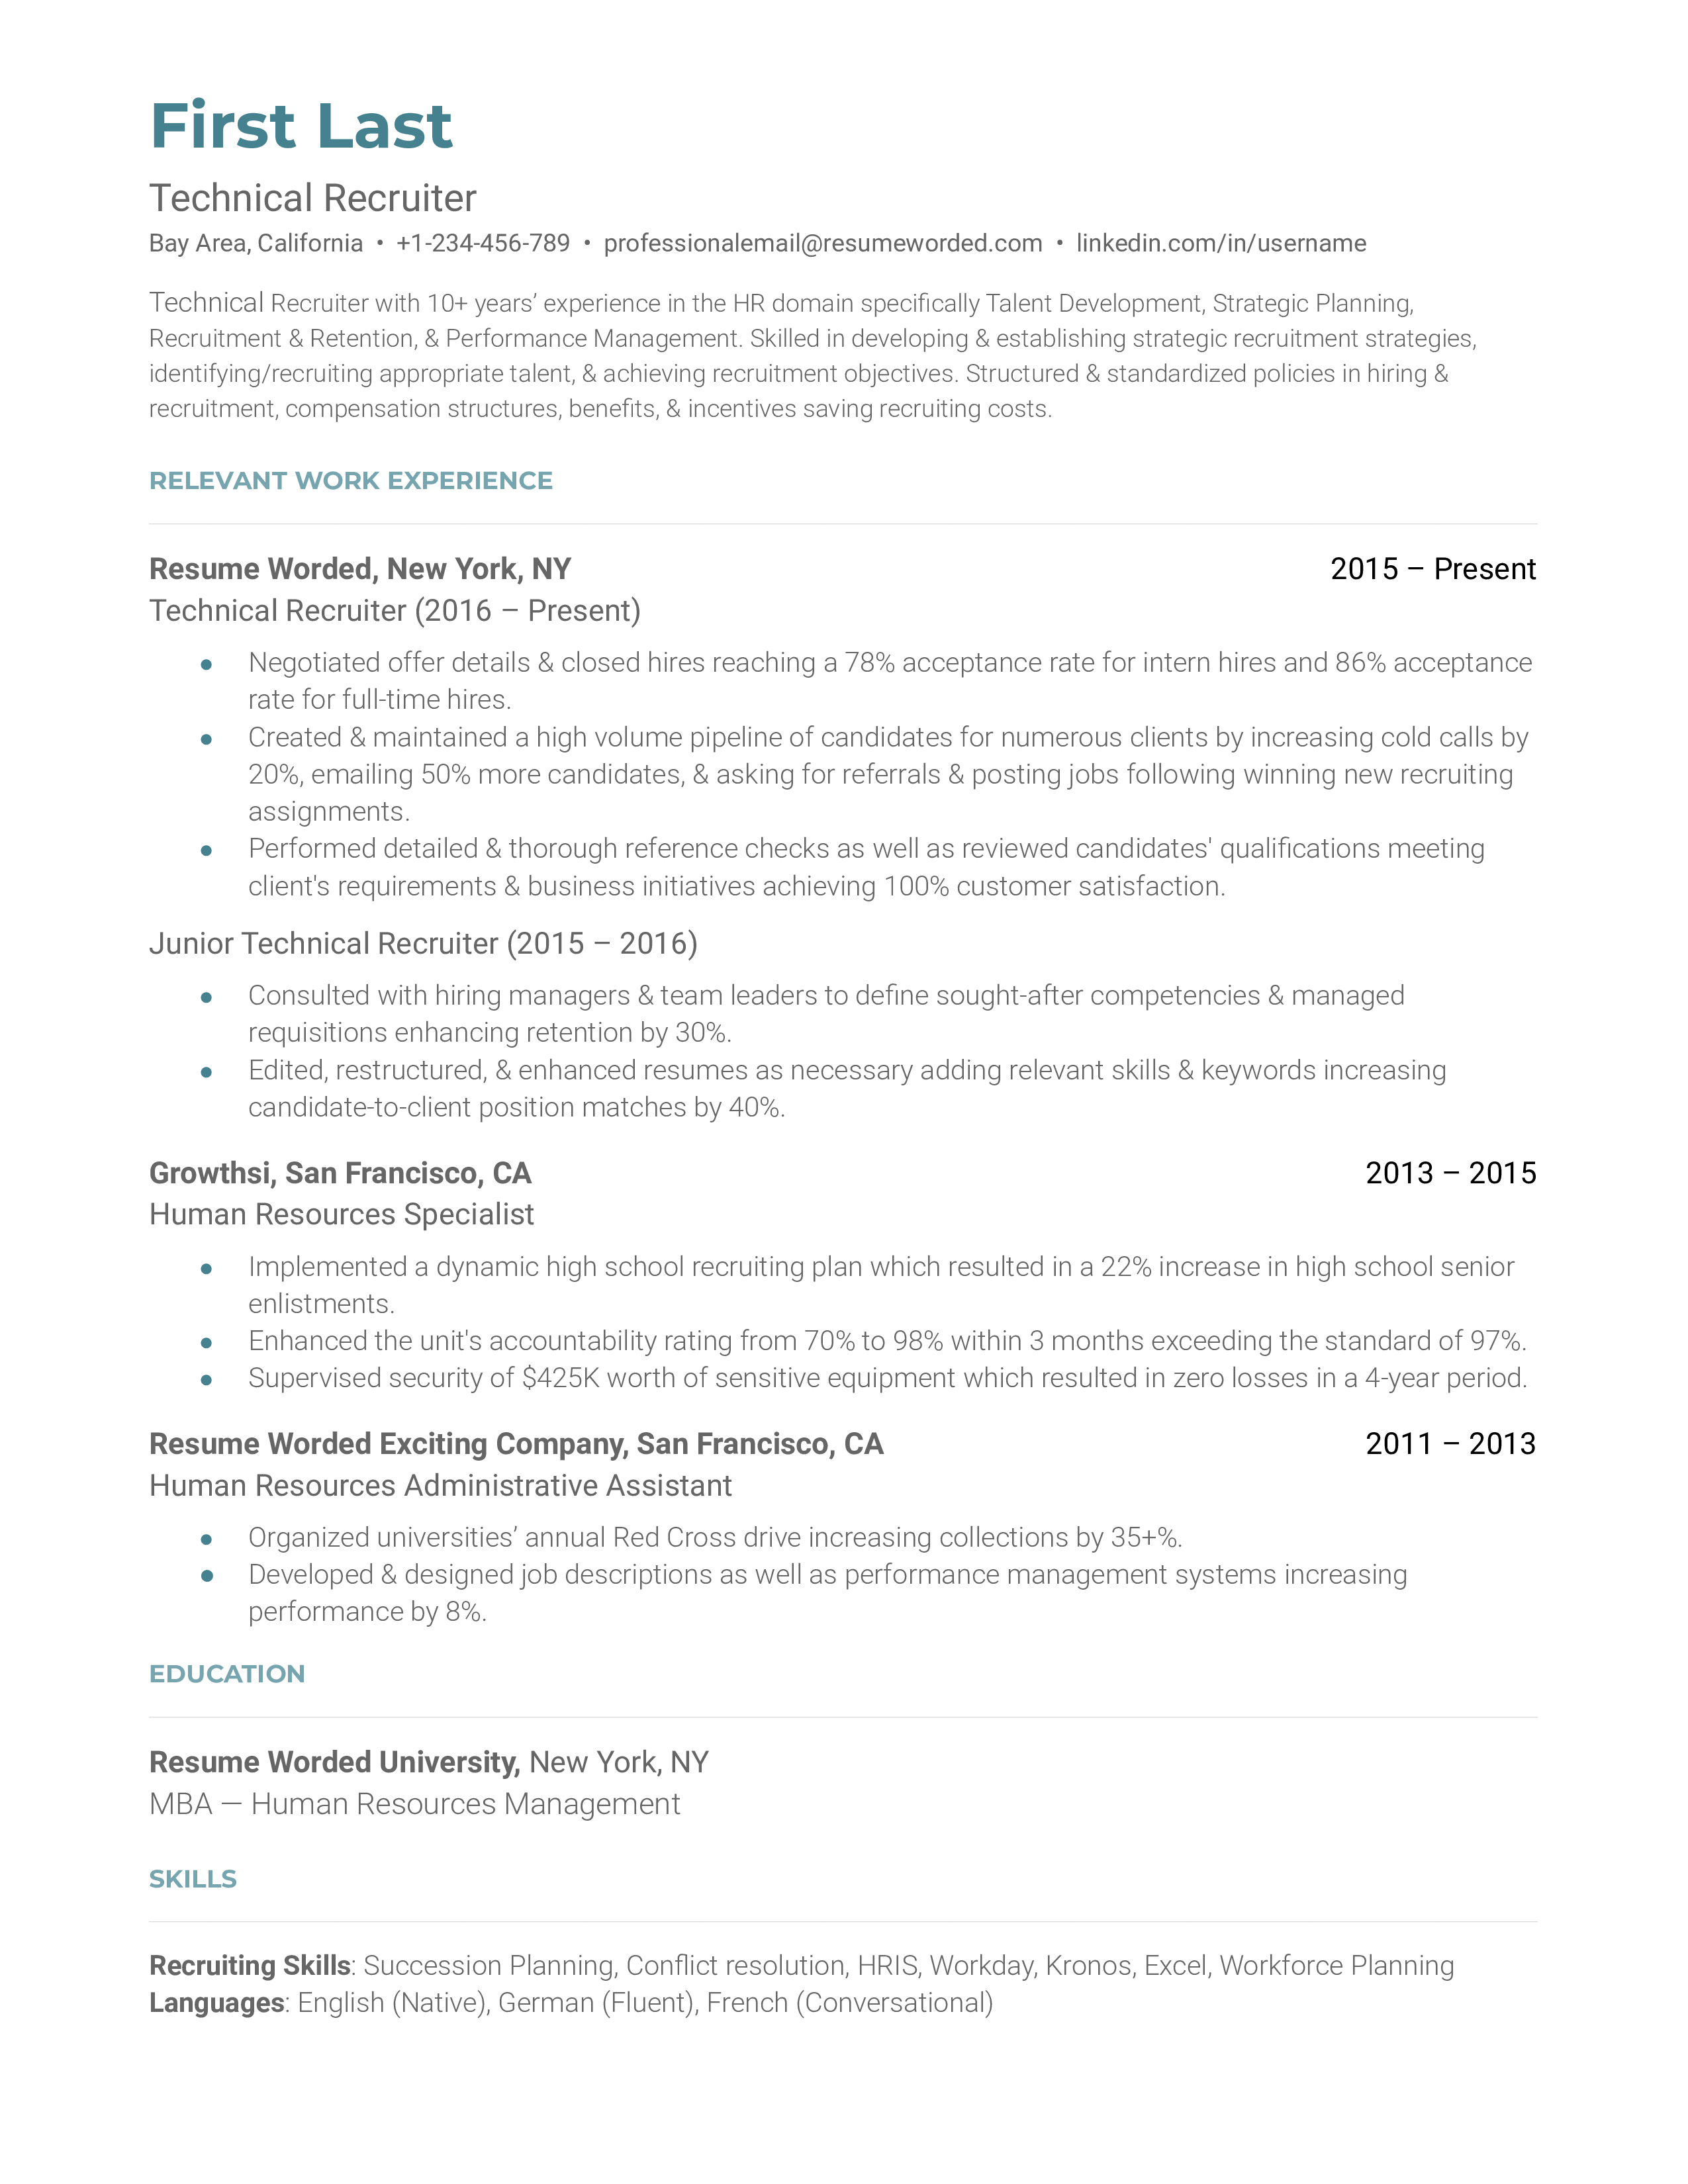 A technical recruiter resume sample that highlights the applicant's knowledge of the technology industry and wealth of previous experience.